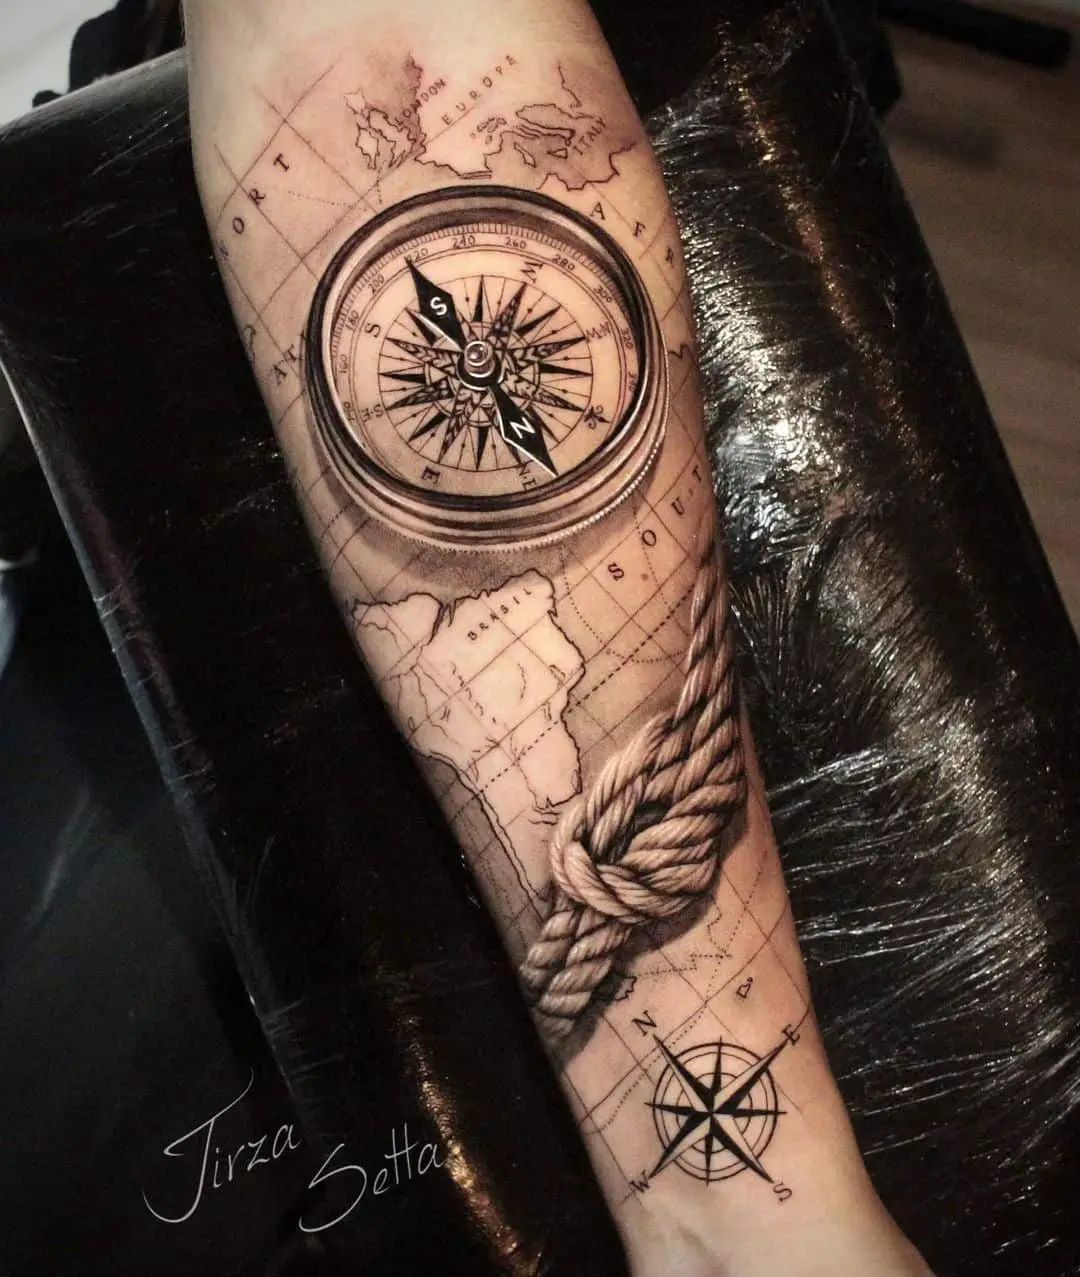 Realistic Drk Ink Compass Tattoo On Forearm